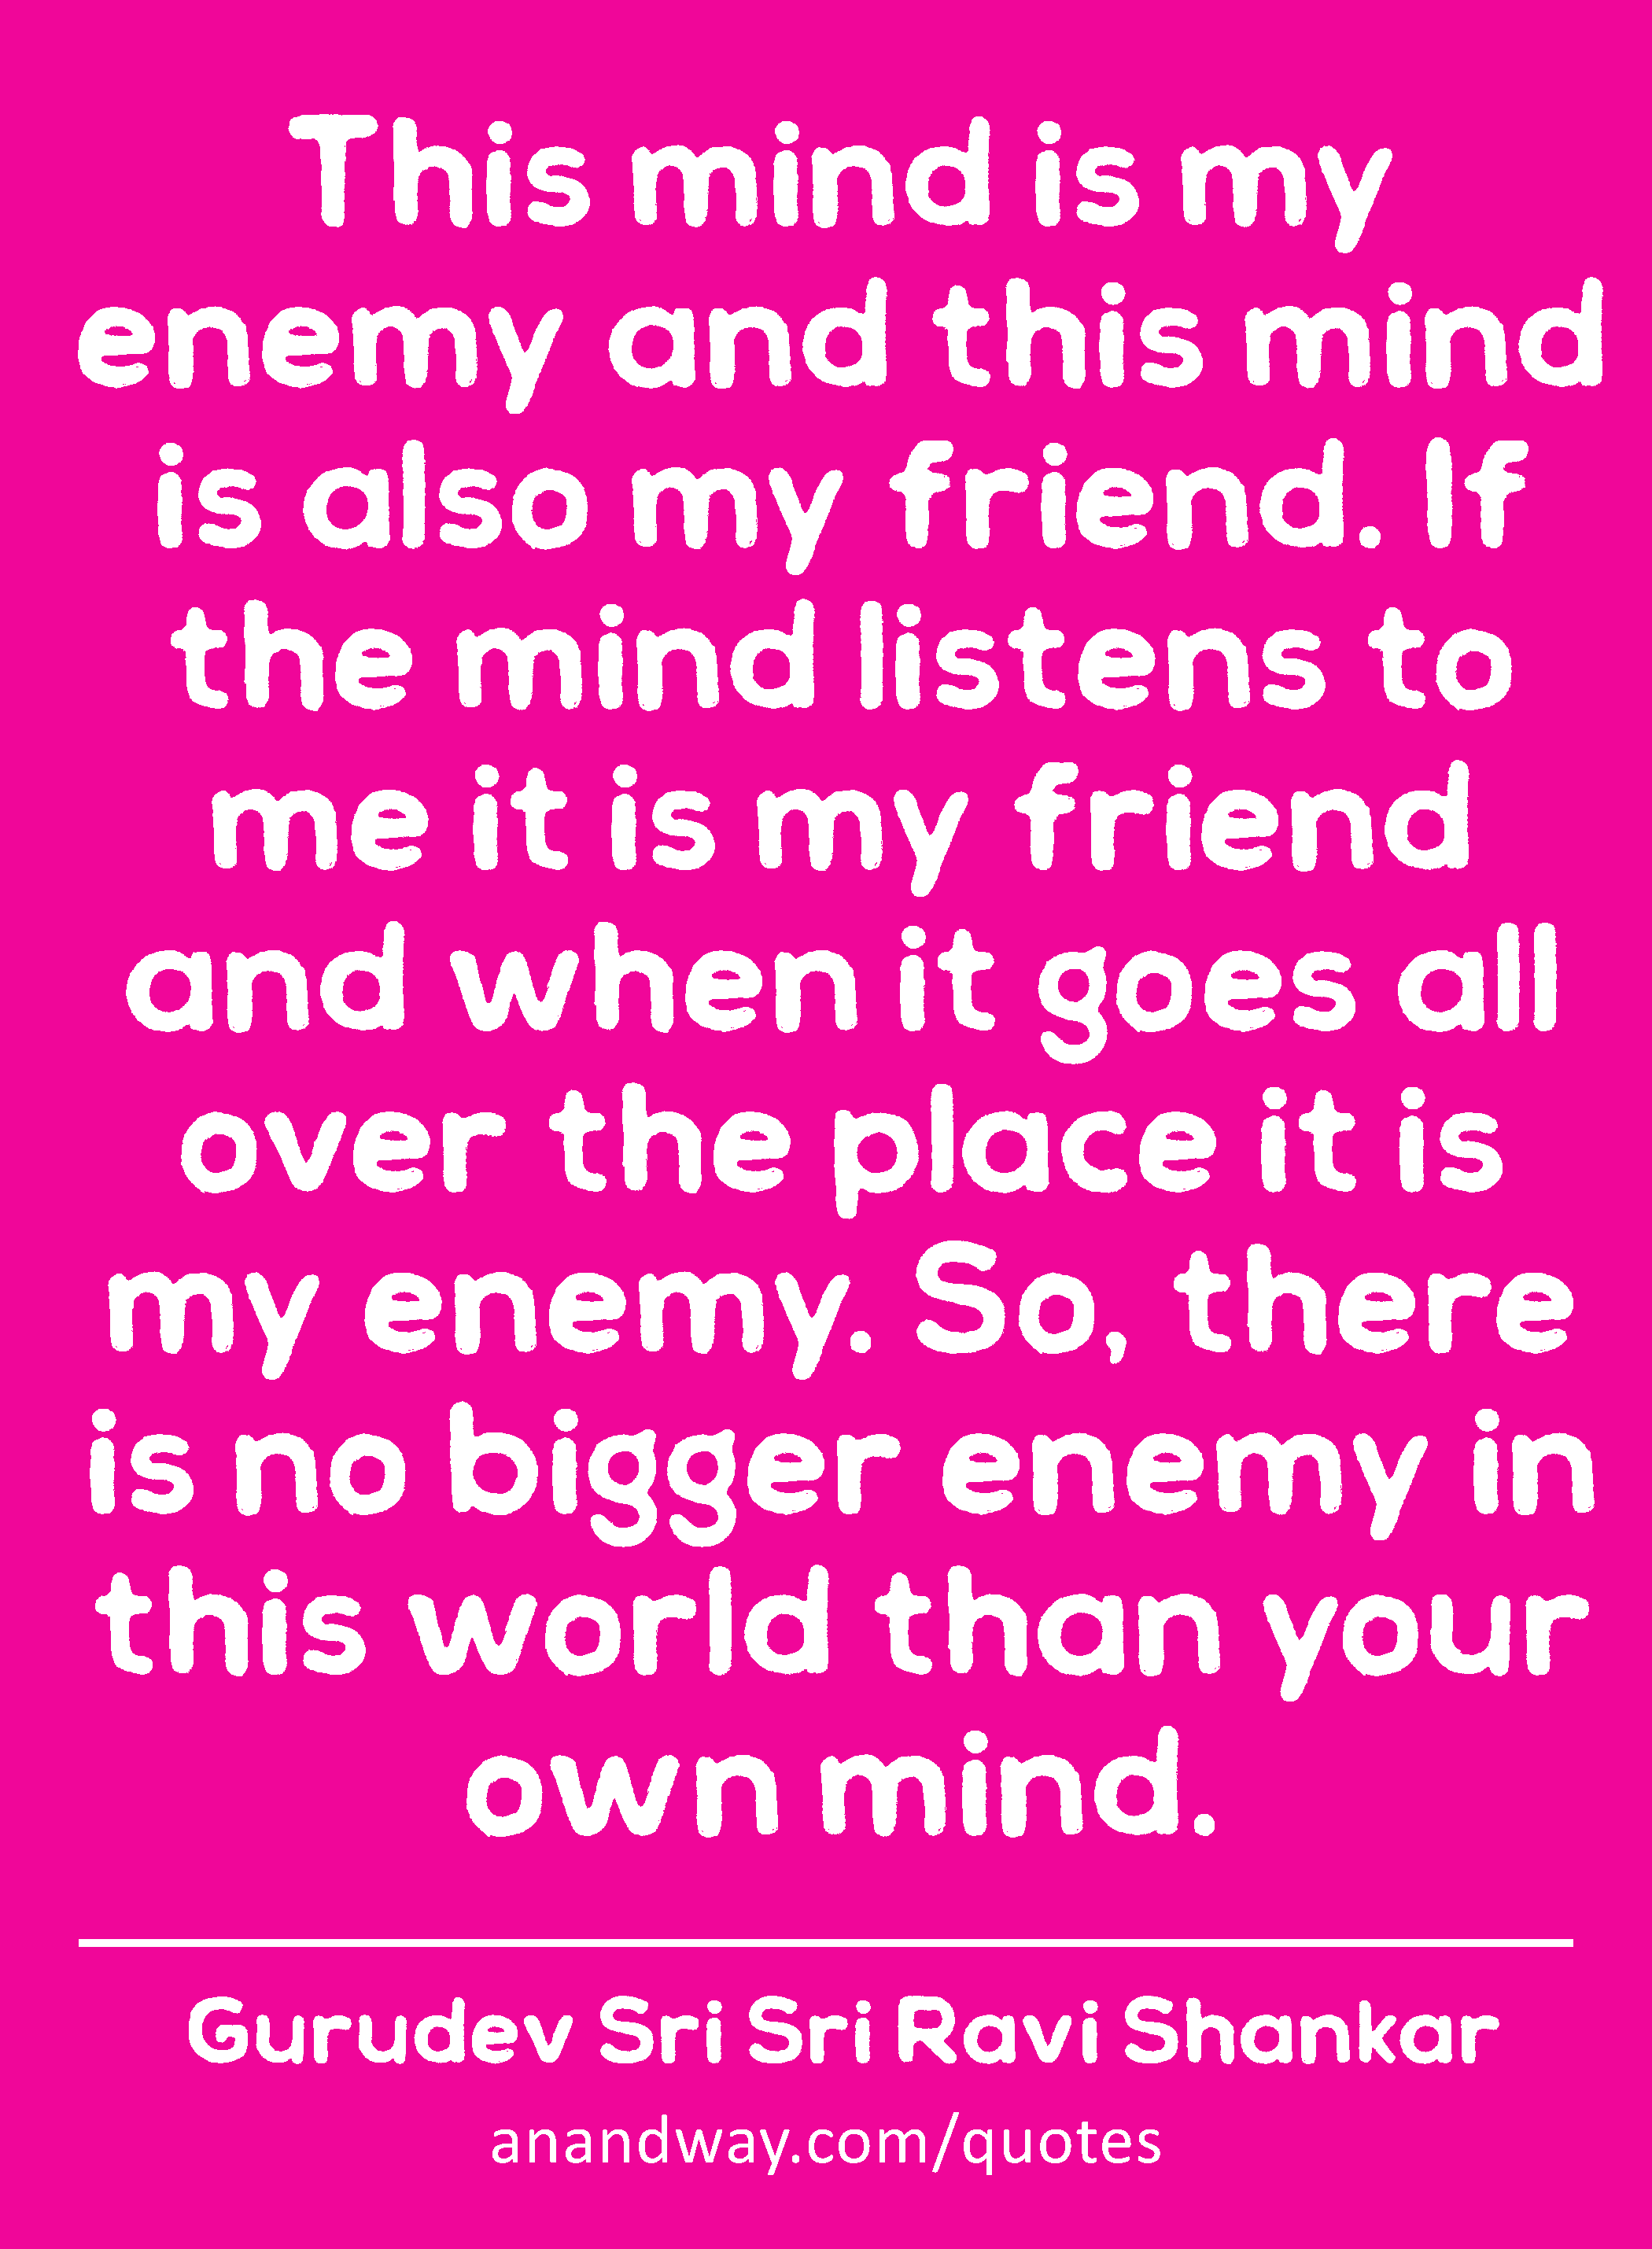 This mind is my enemy and this mind is also my friend. If the mind listens to me it is my friend
 -Gurudev Sri Sri Ravi Shankar